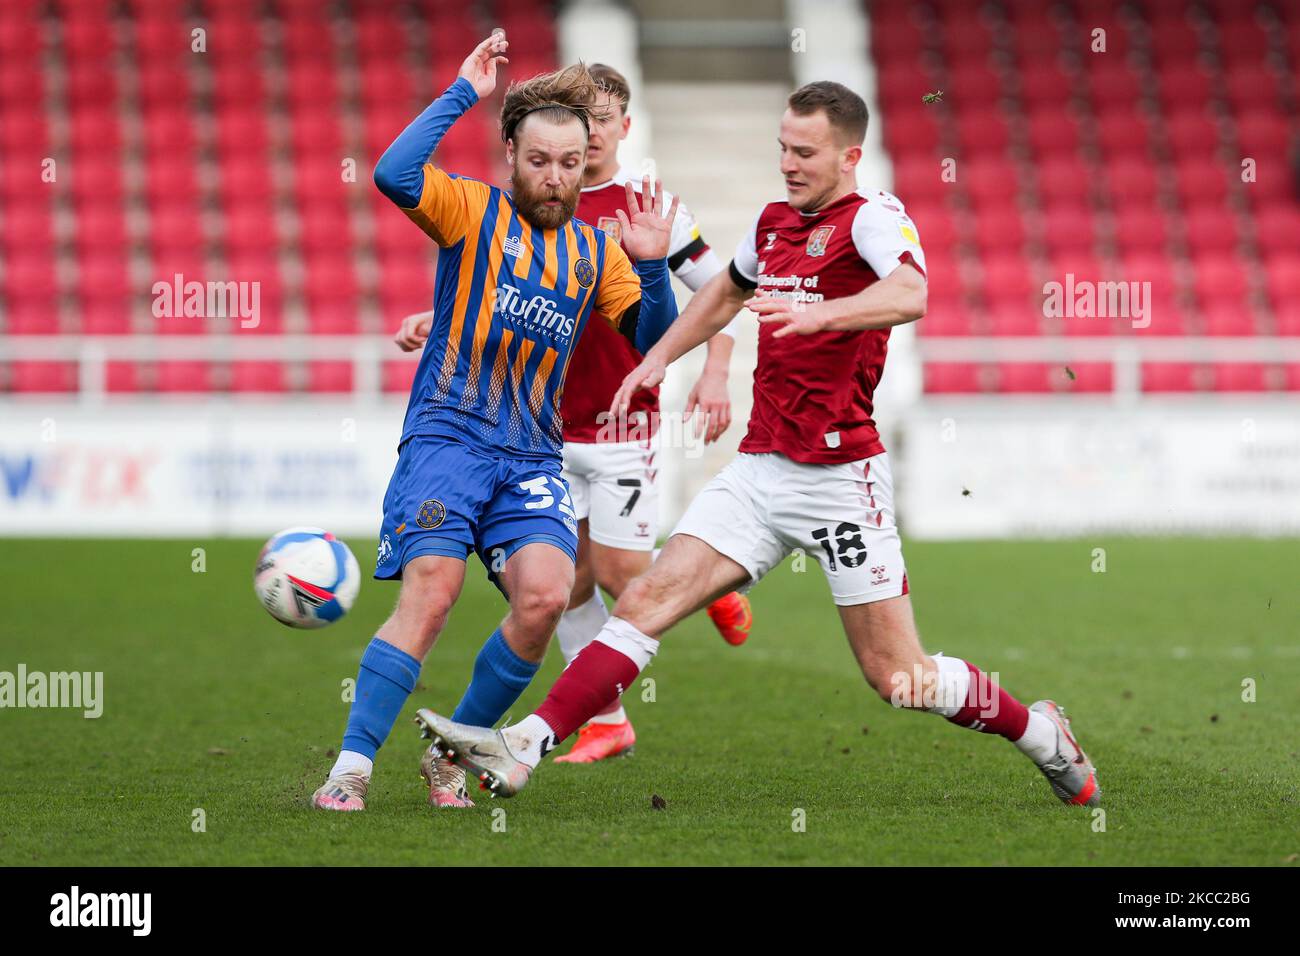 Shrewsbury Town's Harry Chapman is tackled by Northampton Town's Bryn Morris during the second half of the Sky Bet League One match between Northampton Town and Shrewsbury Town at the PTS Academy Stadium, Northampton on Friday 2nd April 2021. (Photo by John Cripps/MI News/NurPhoto) Stock Photo